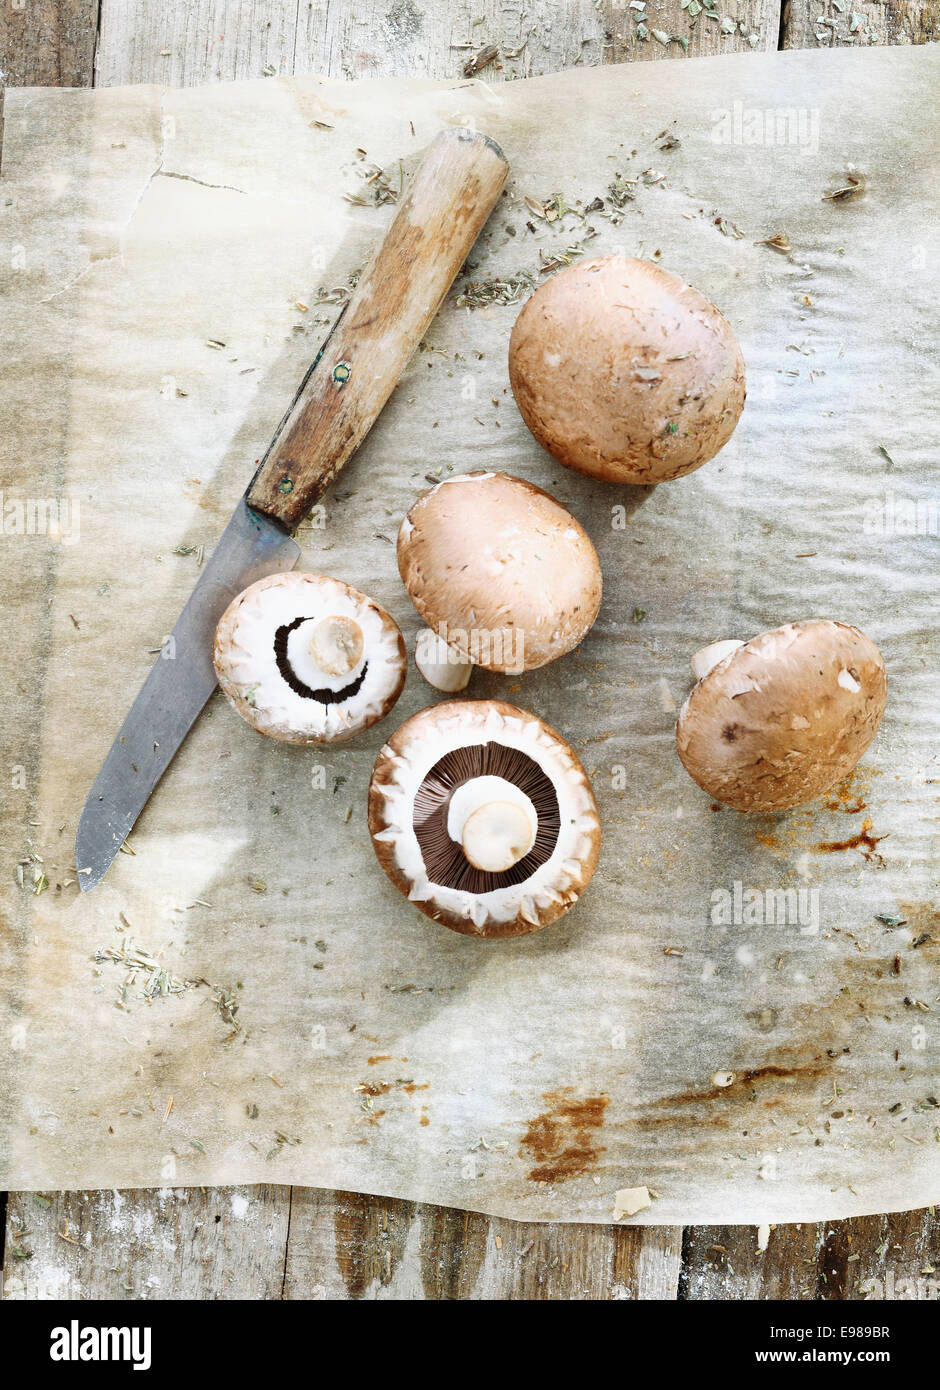 Some brown mushrooms on dirty background with an old knife Stock Photo